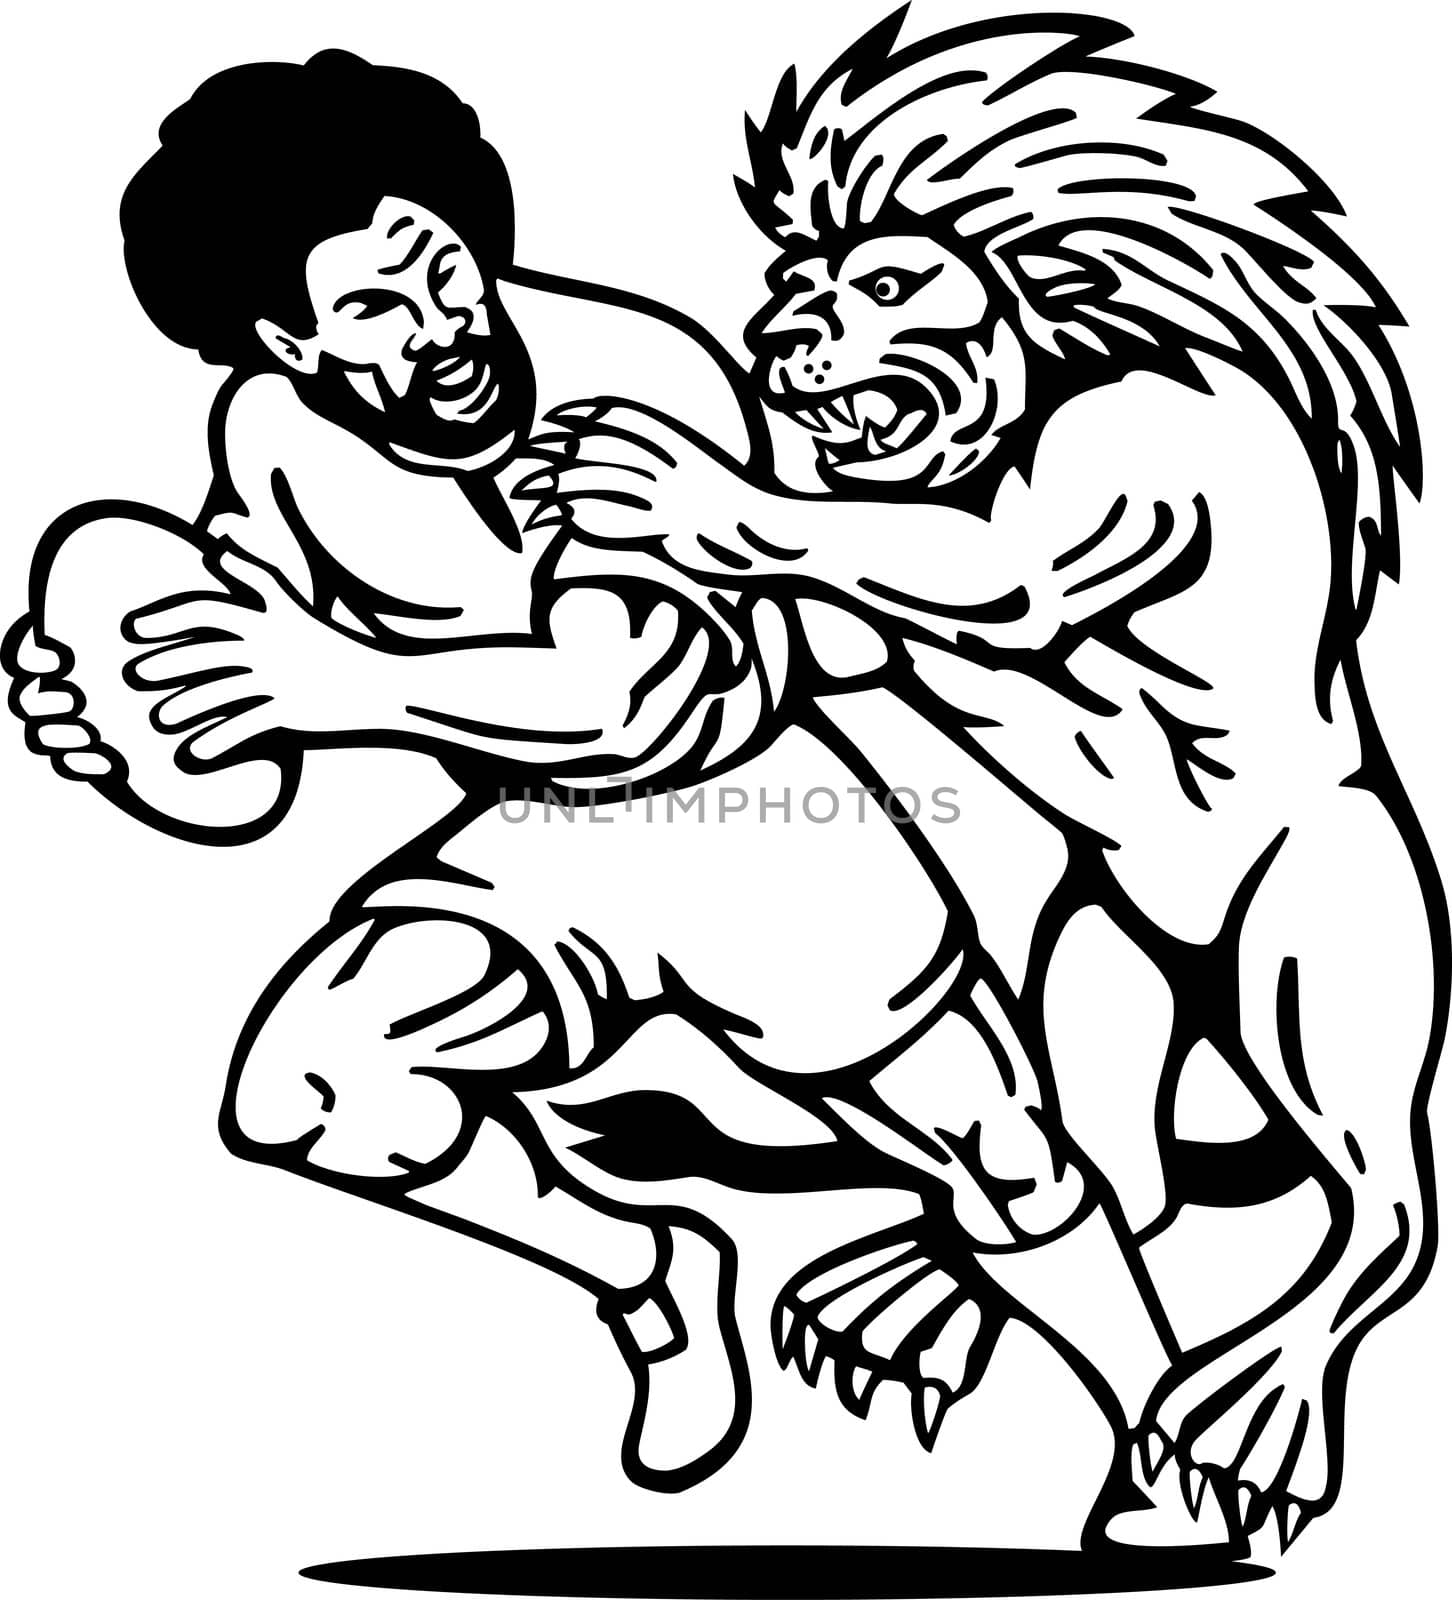 Rugby player running with ball attack by lion by patrimonio